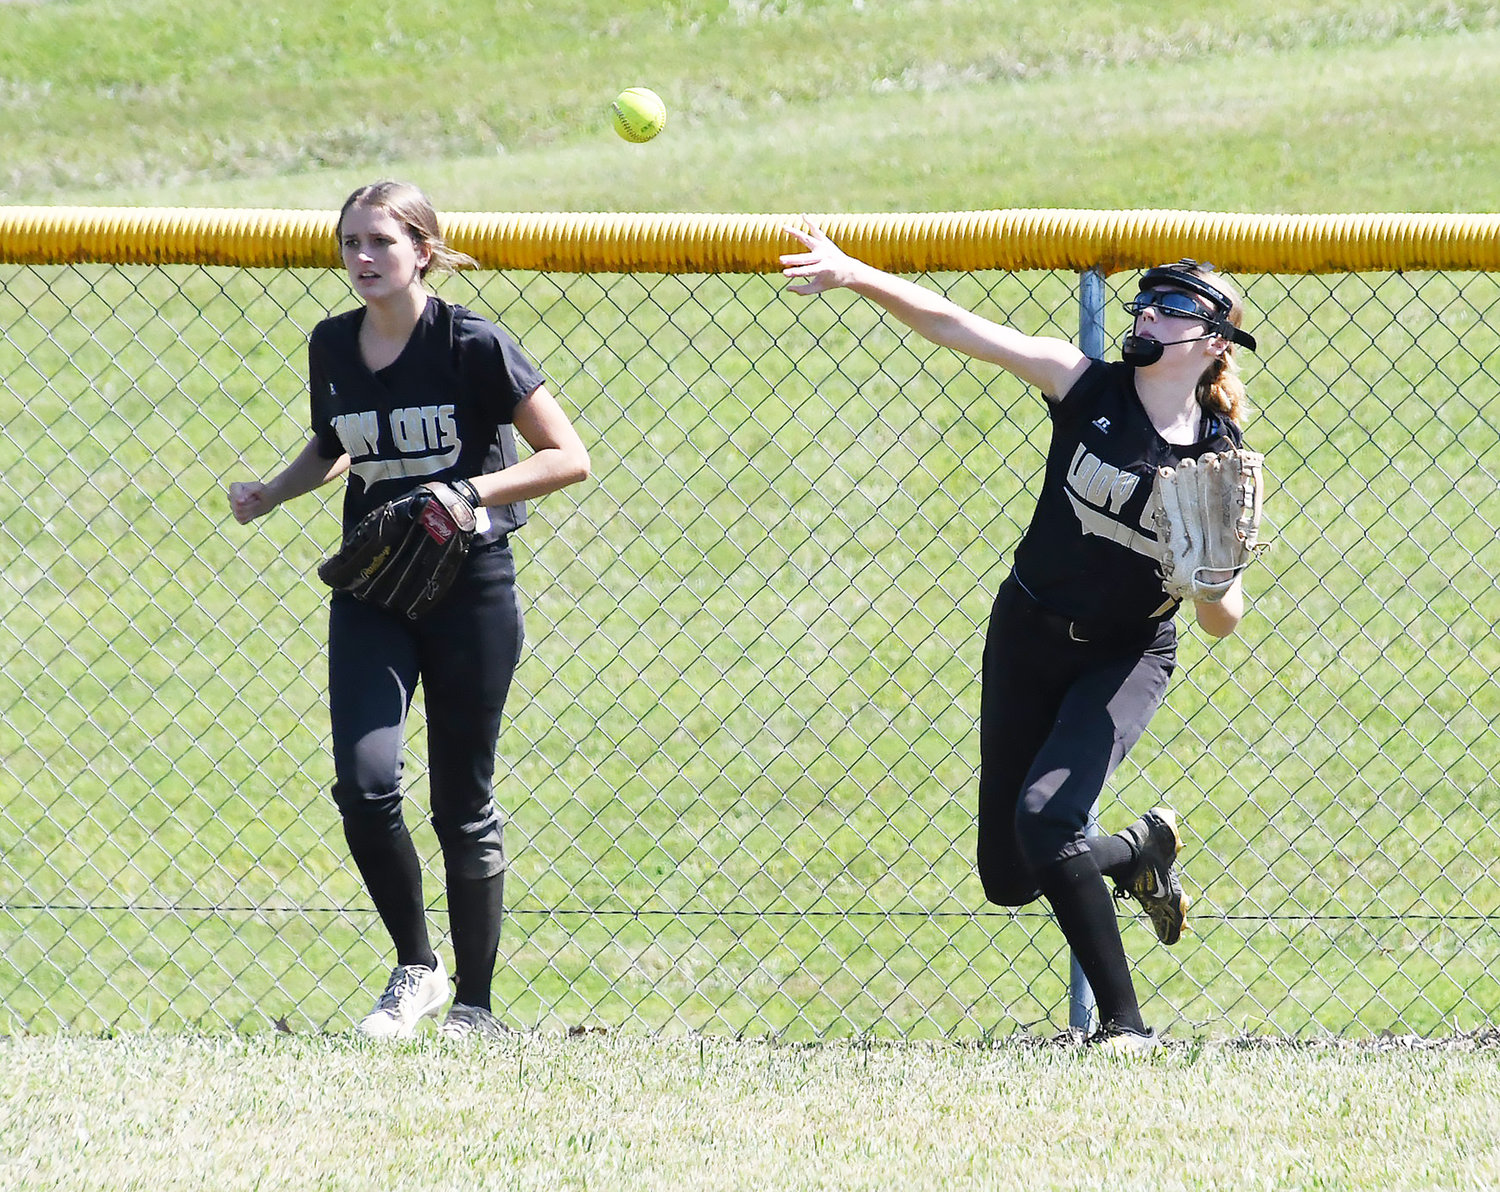 Cairo's Abi Ogle (right) throws the ball back toward the infield after a Macon triple. Jersey Bailey also is photographed, at left.